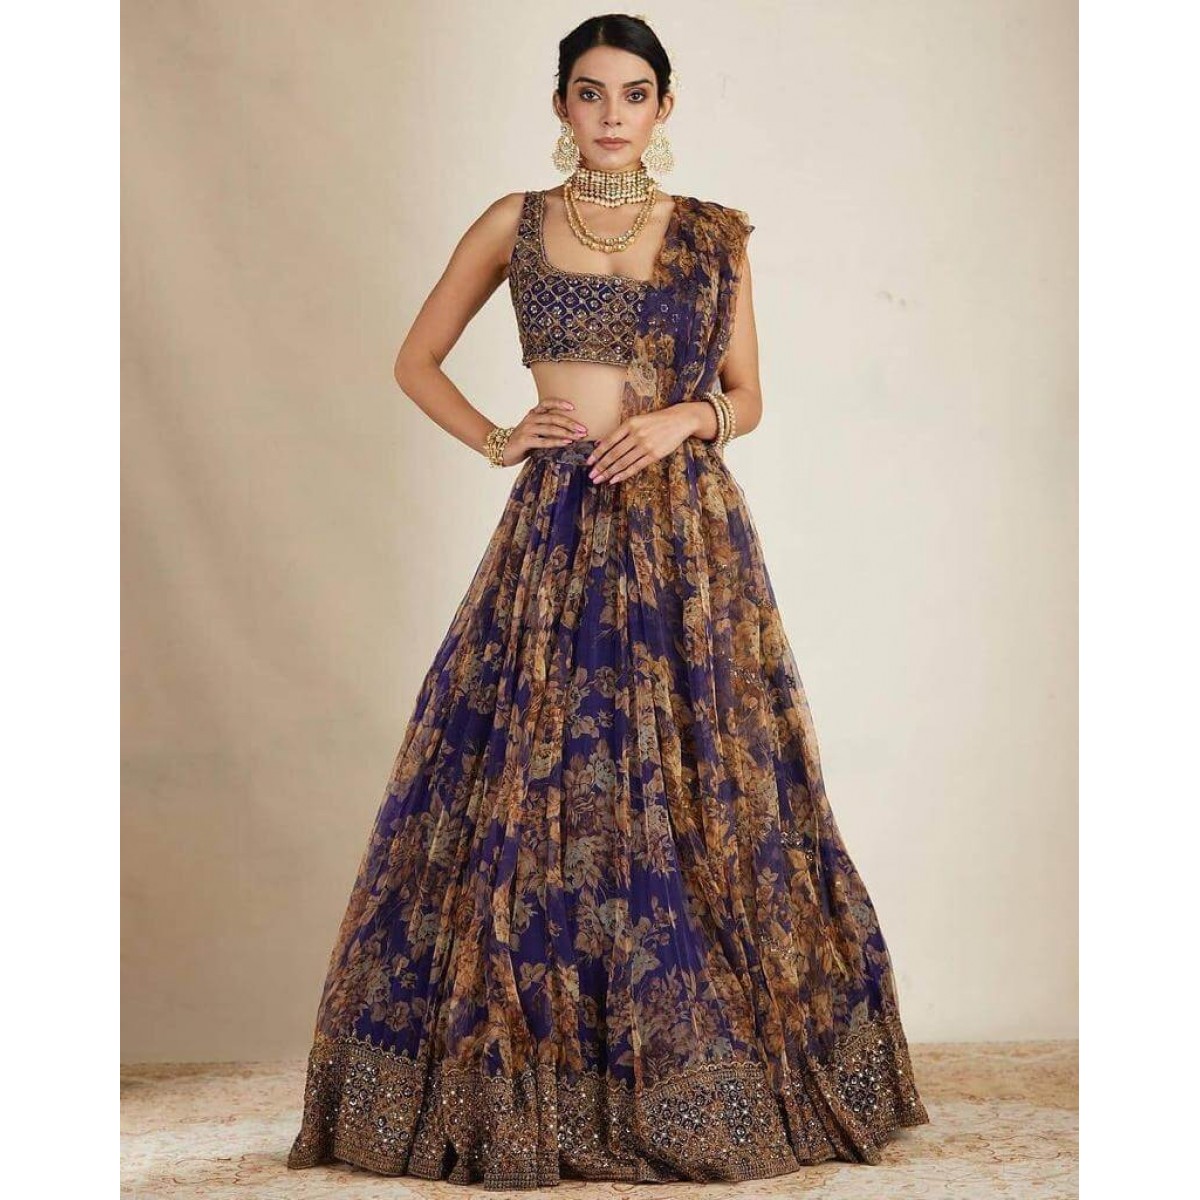 Kiara Advani Wedding Lehenga Choli in Georgette With Sequence Work and Can  Can for Flair in USA, UK, Malaysia, South Africa, Dubai, Singapore